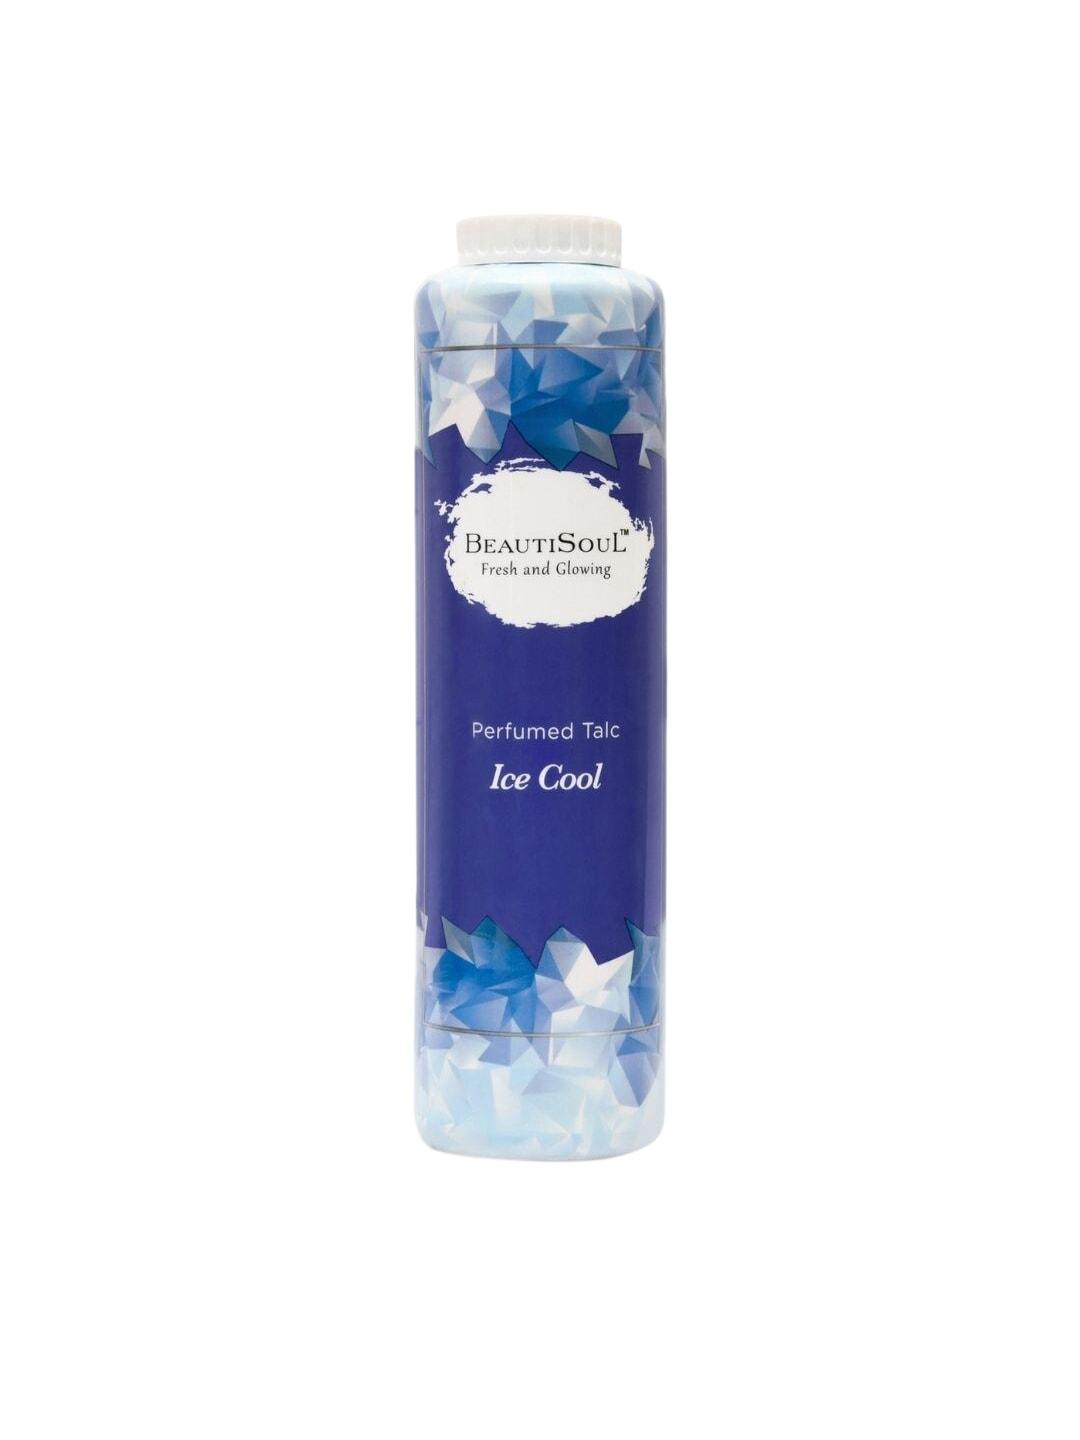 Beautisoul Ice Cool Perfumed Talc 300g